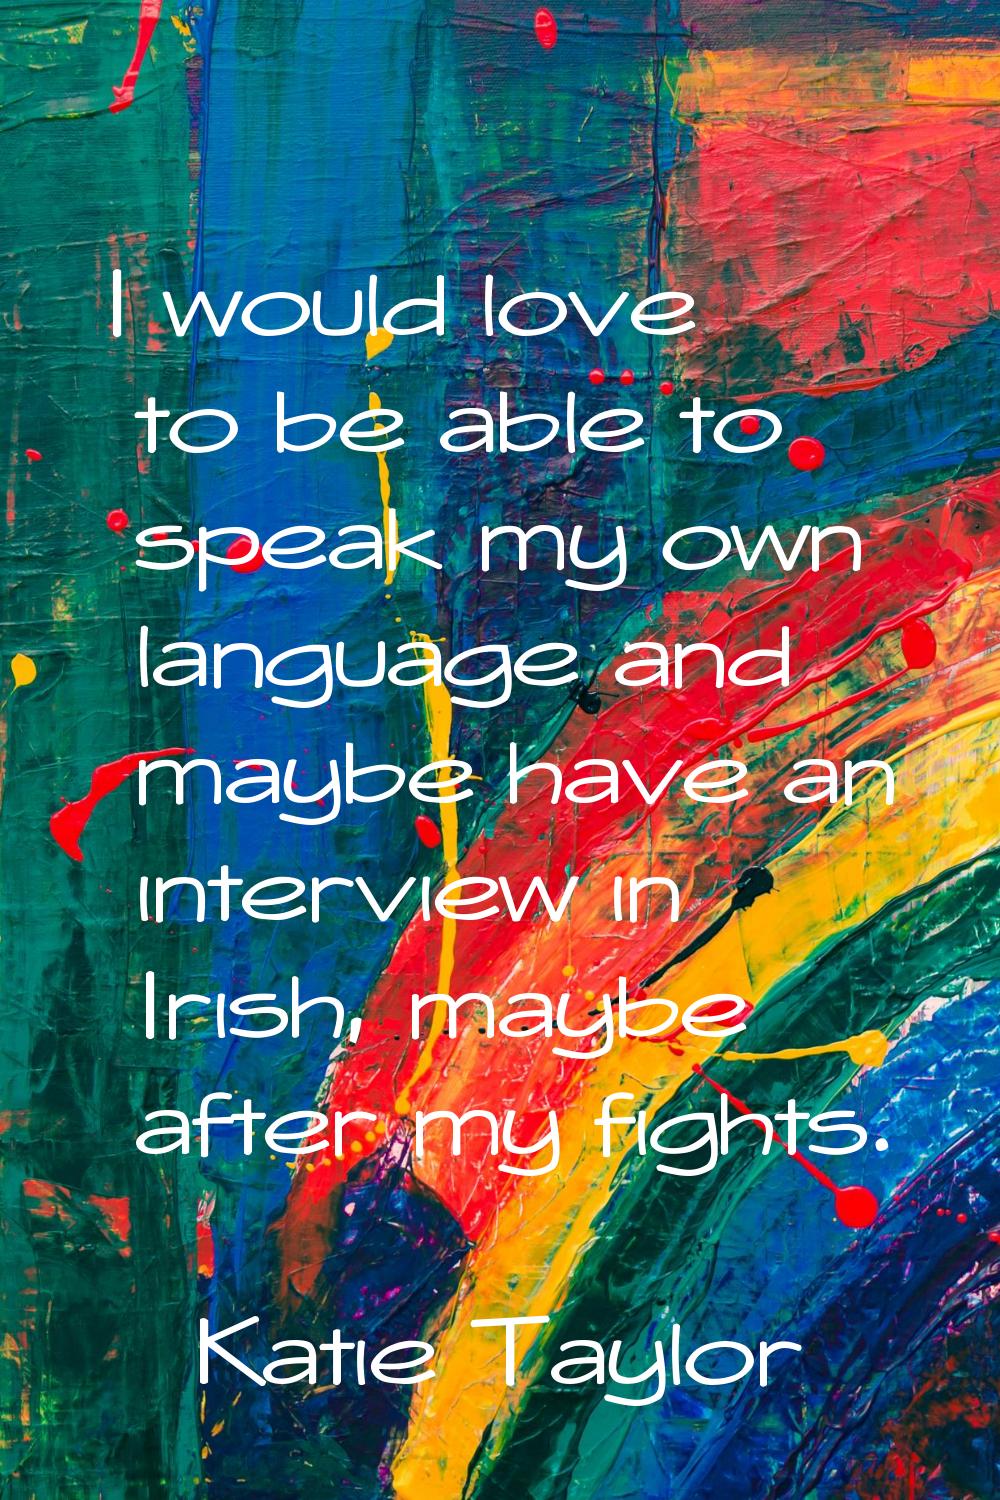 I would love to be able to speak my own language and maybe have an interview in Irish, maybe after 